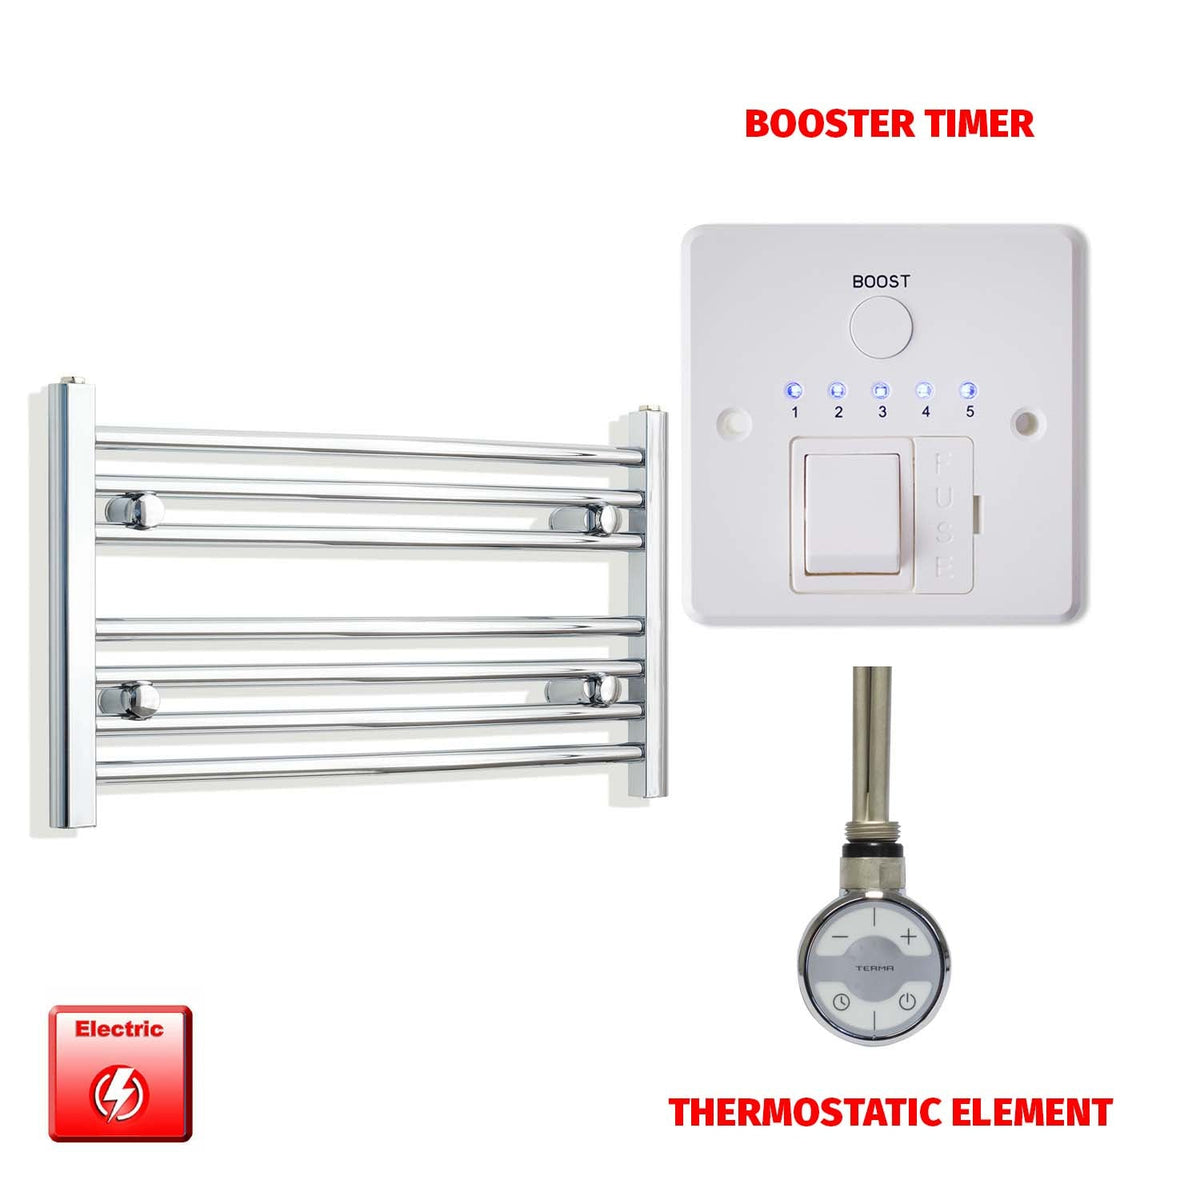 400mm High 700mm Wide Pre-Filled Electric Heated Towel Radiator Curved or Straight Chrome MOA Thermostatic element Booster timer